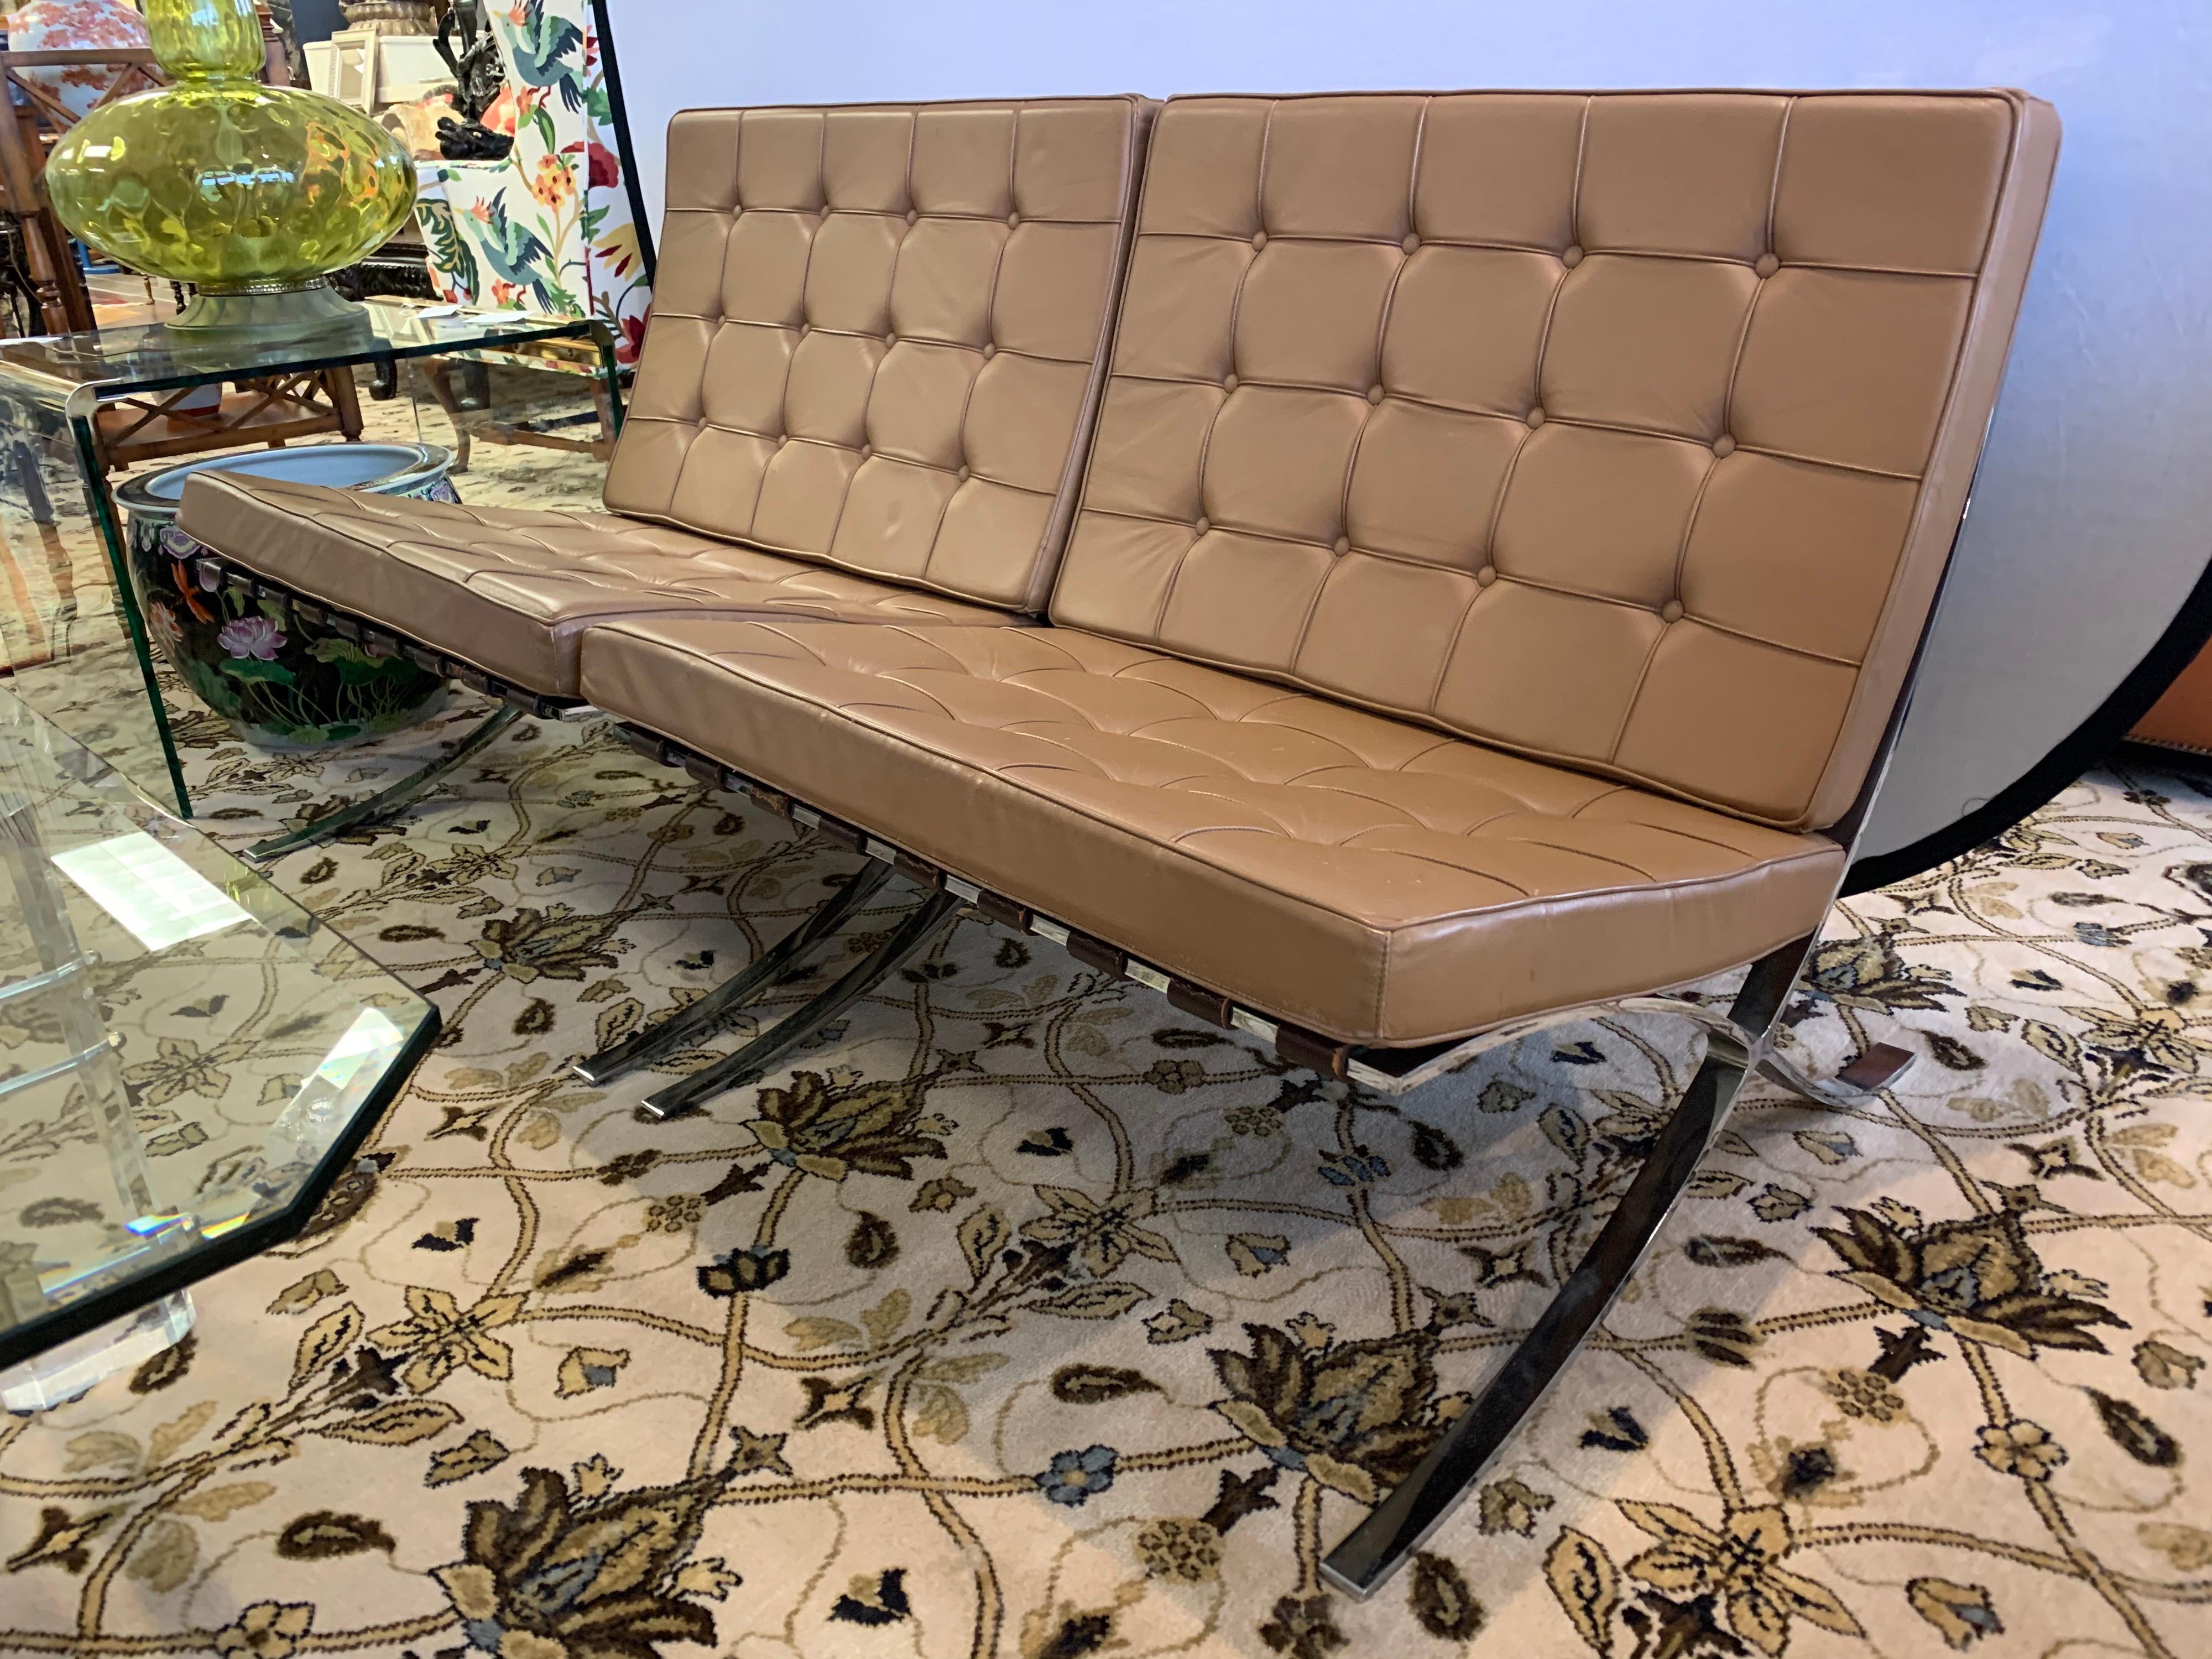 Pair of unsigned vintage light brown leather Barcelona chairs, circa 1970s and made in USA.
Condition of leather is very good. One repair under seat, hidden unless chair is upside down. See pics.